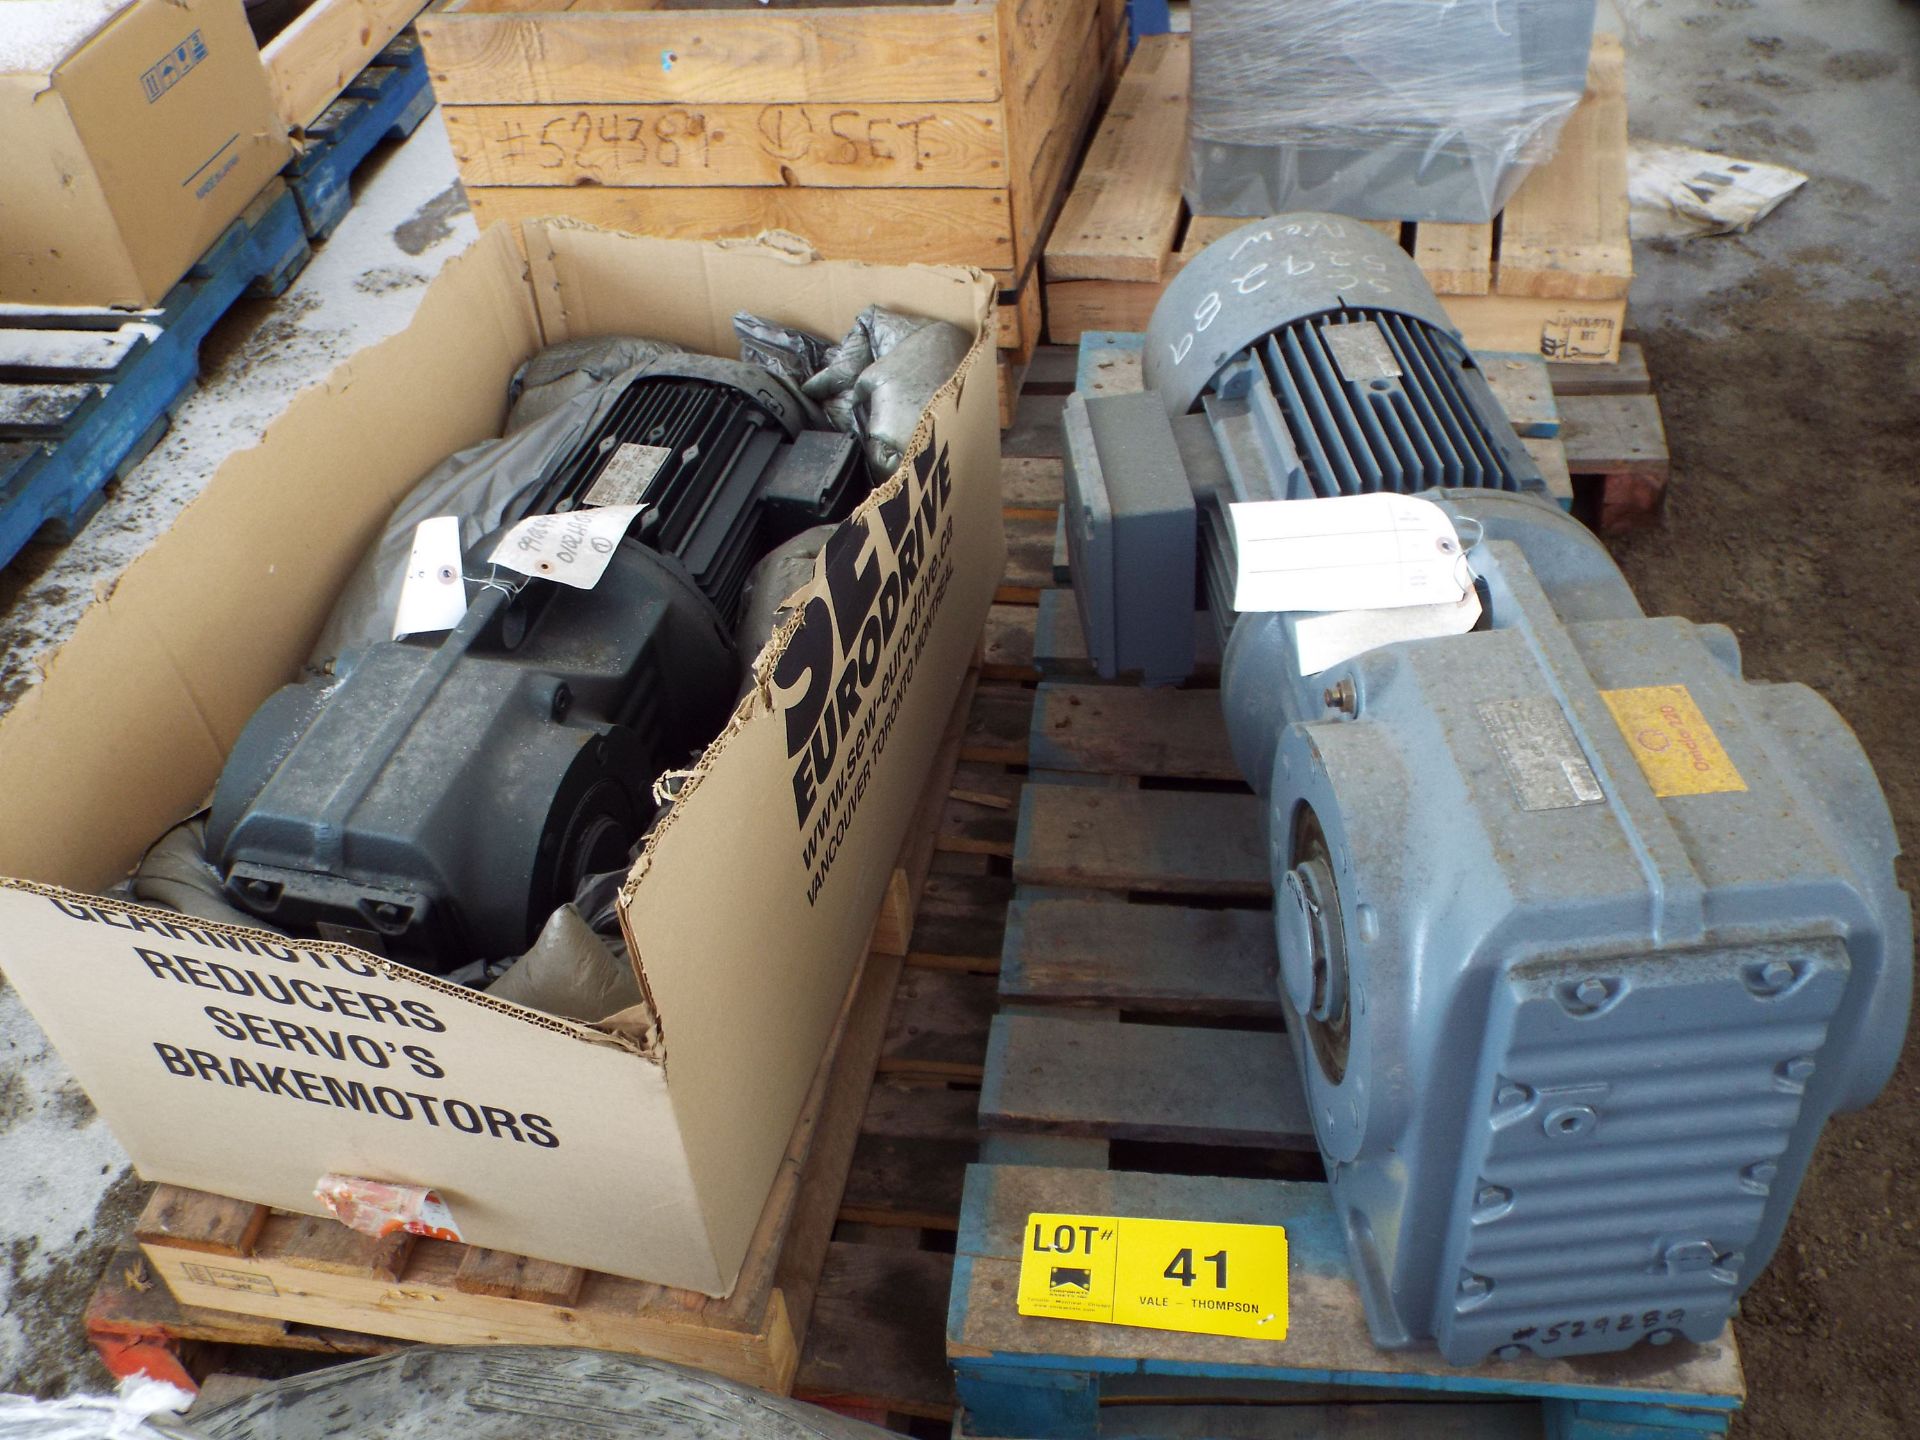 LOT/ CONTENTS OF SKID - (1) SEW EURODRIVE GEARBOX WITH 10 HP, 330/575V, 1740 RPM, 3-PHASE ELECTRIC